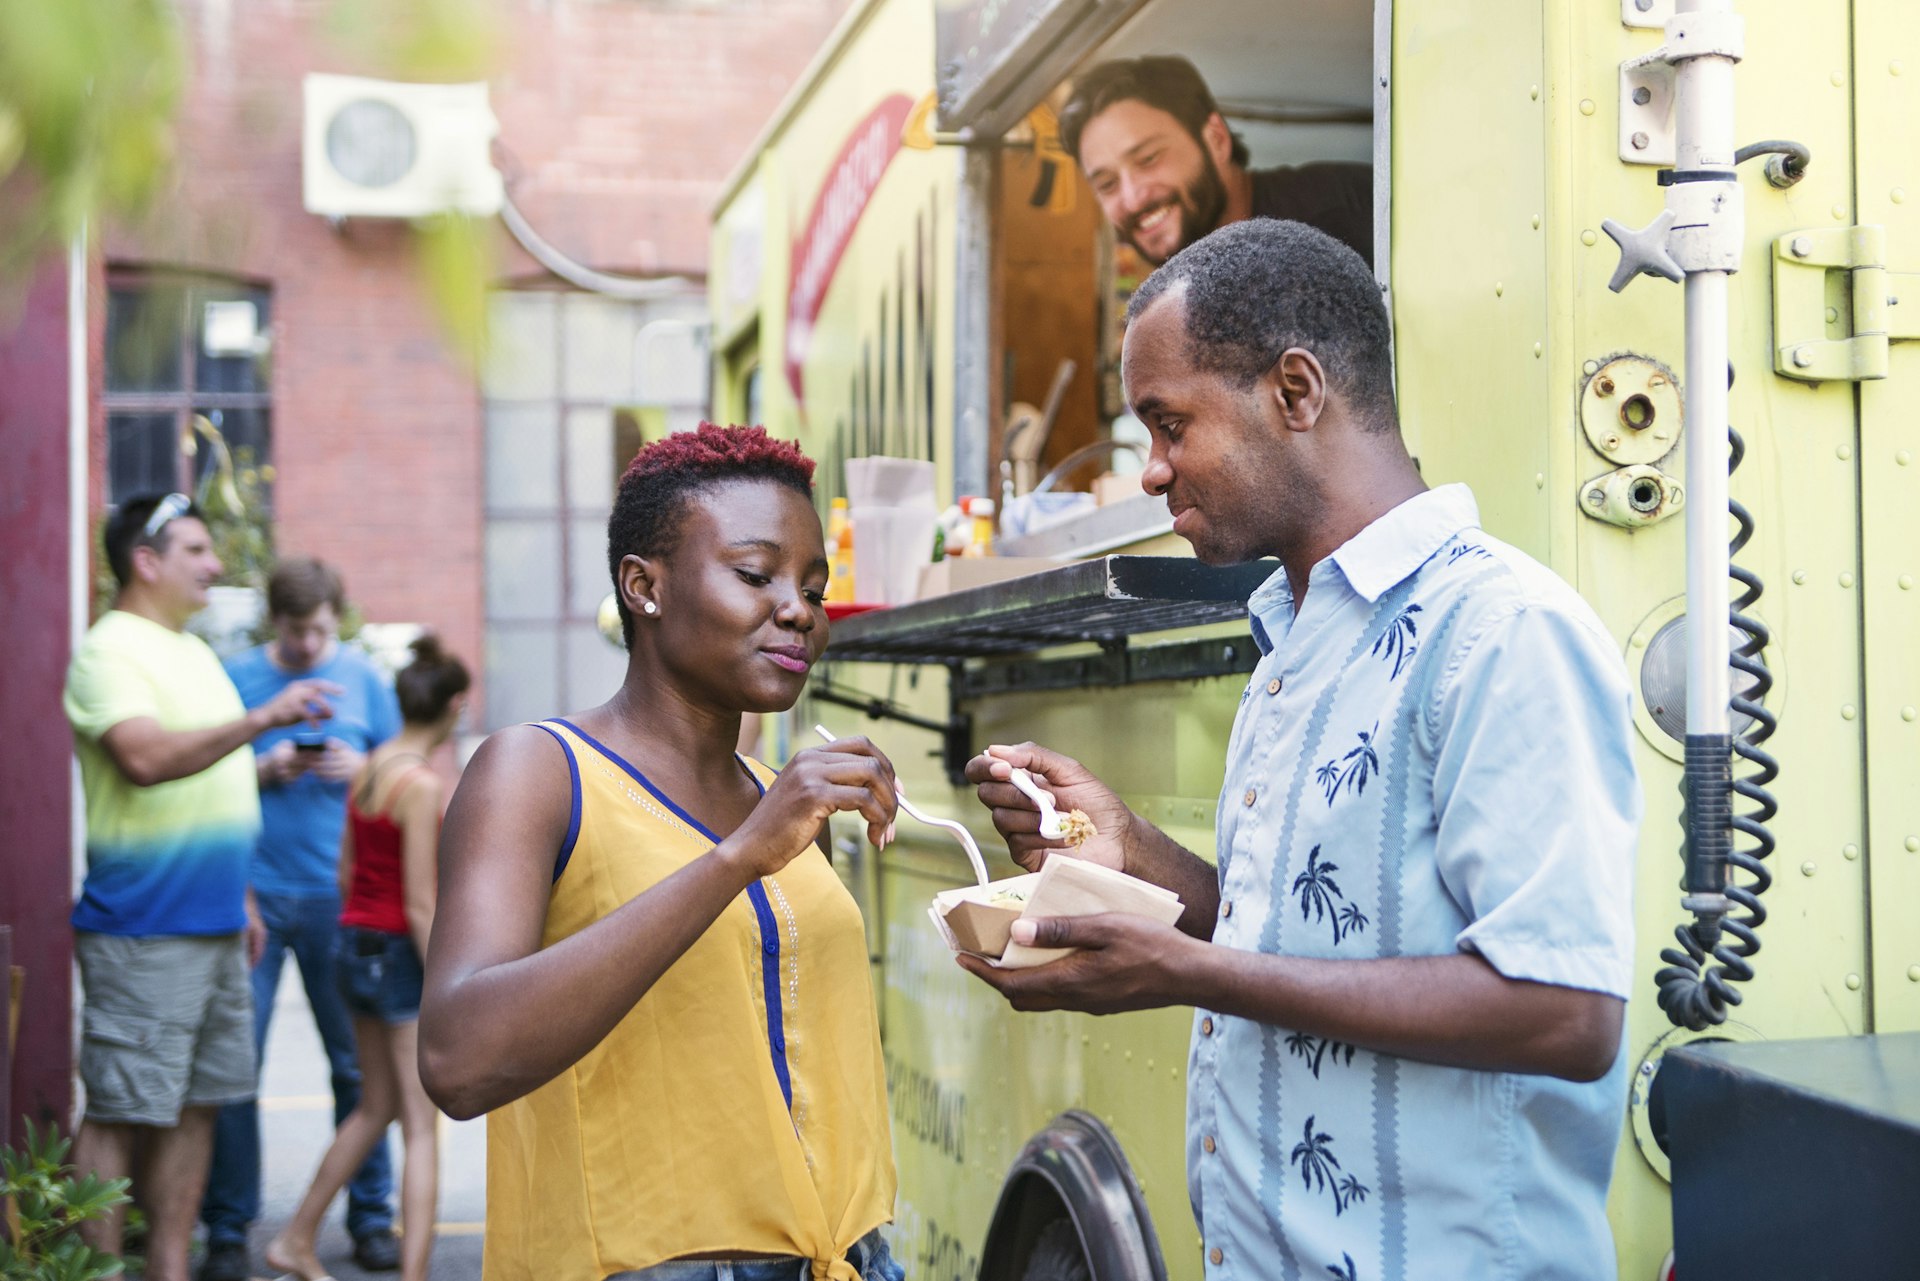 A couple enjoying their food from a food truck in Montreal. People in the background.